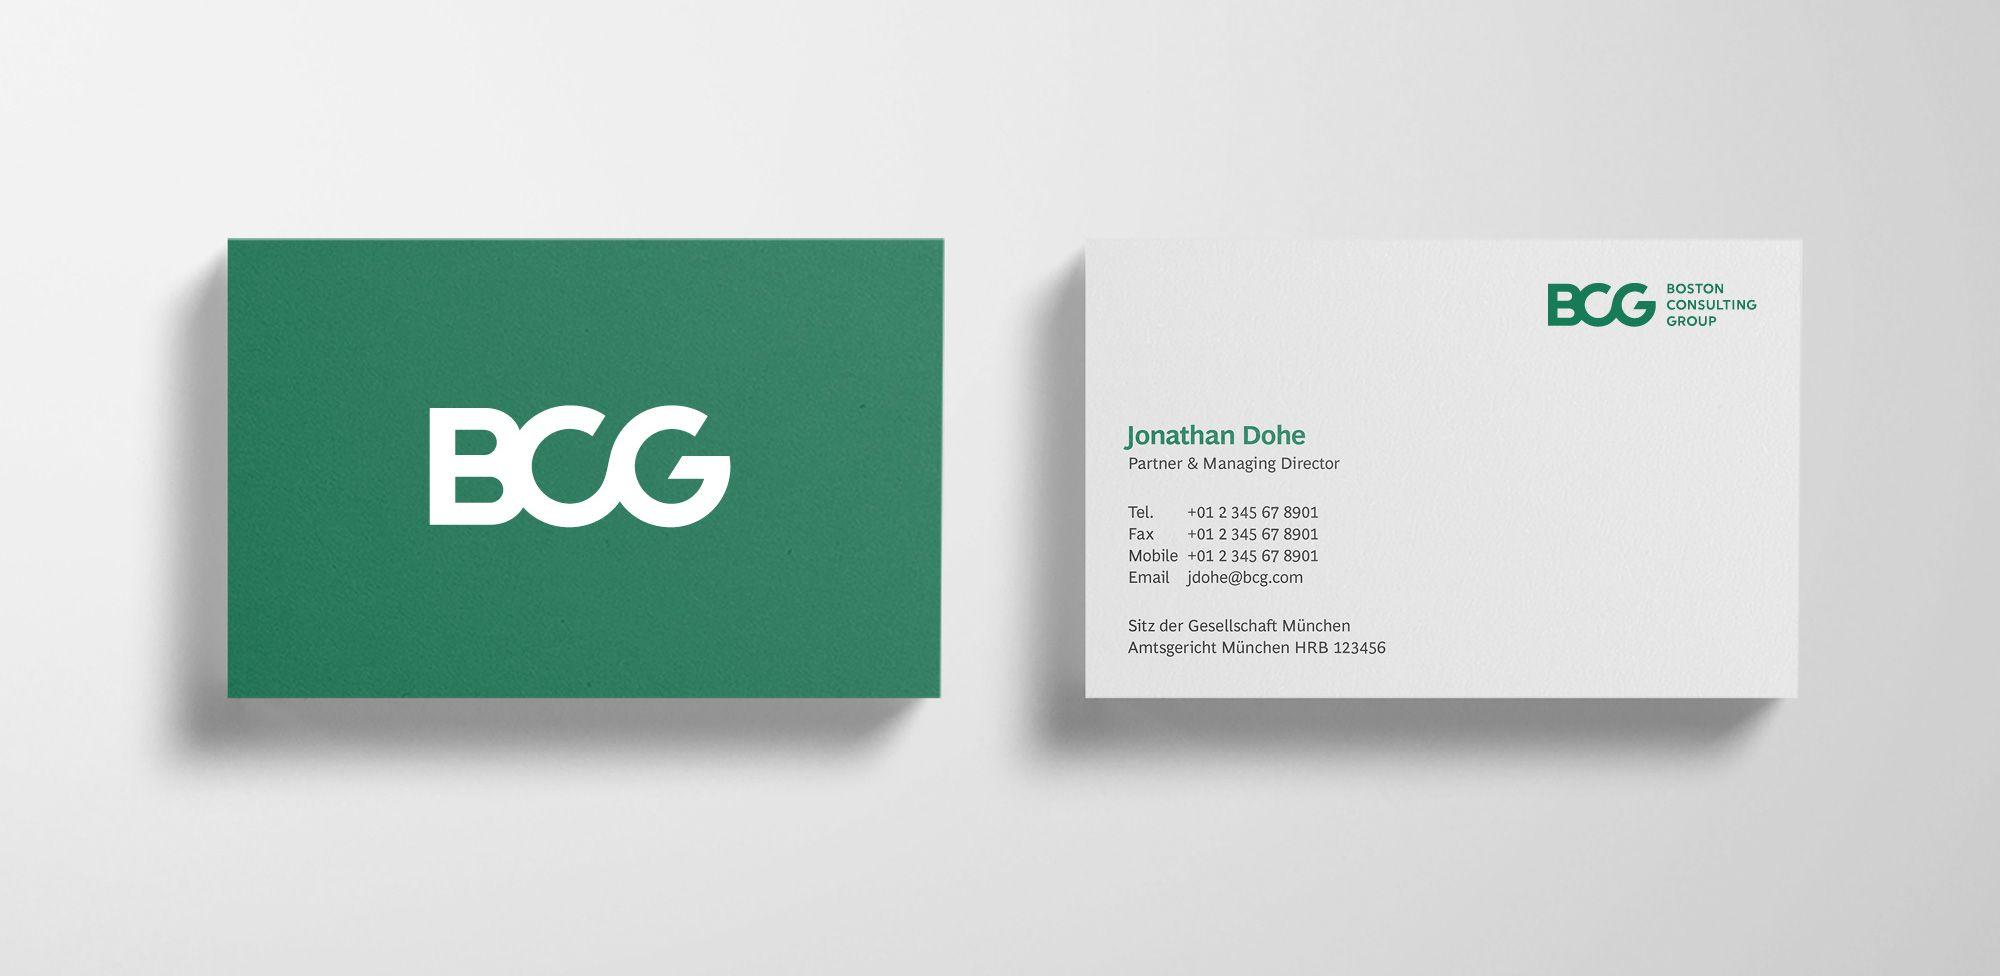 BCG Logo - Brand New: New Logo and Identity for Boston Consulting Group by ...